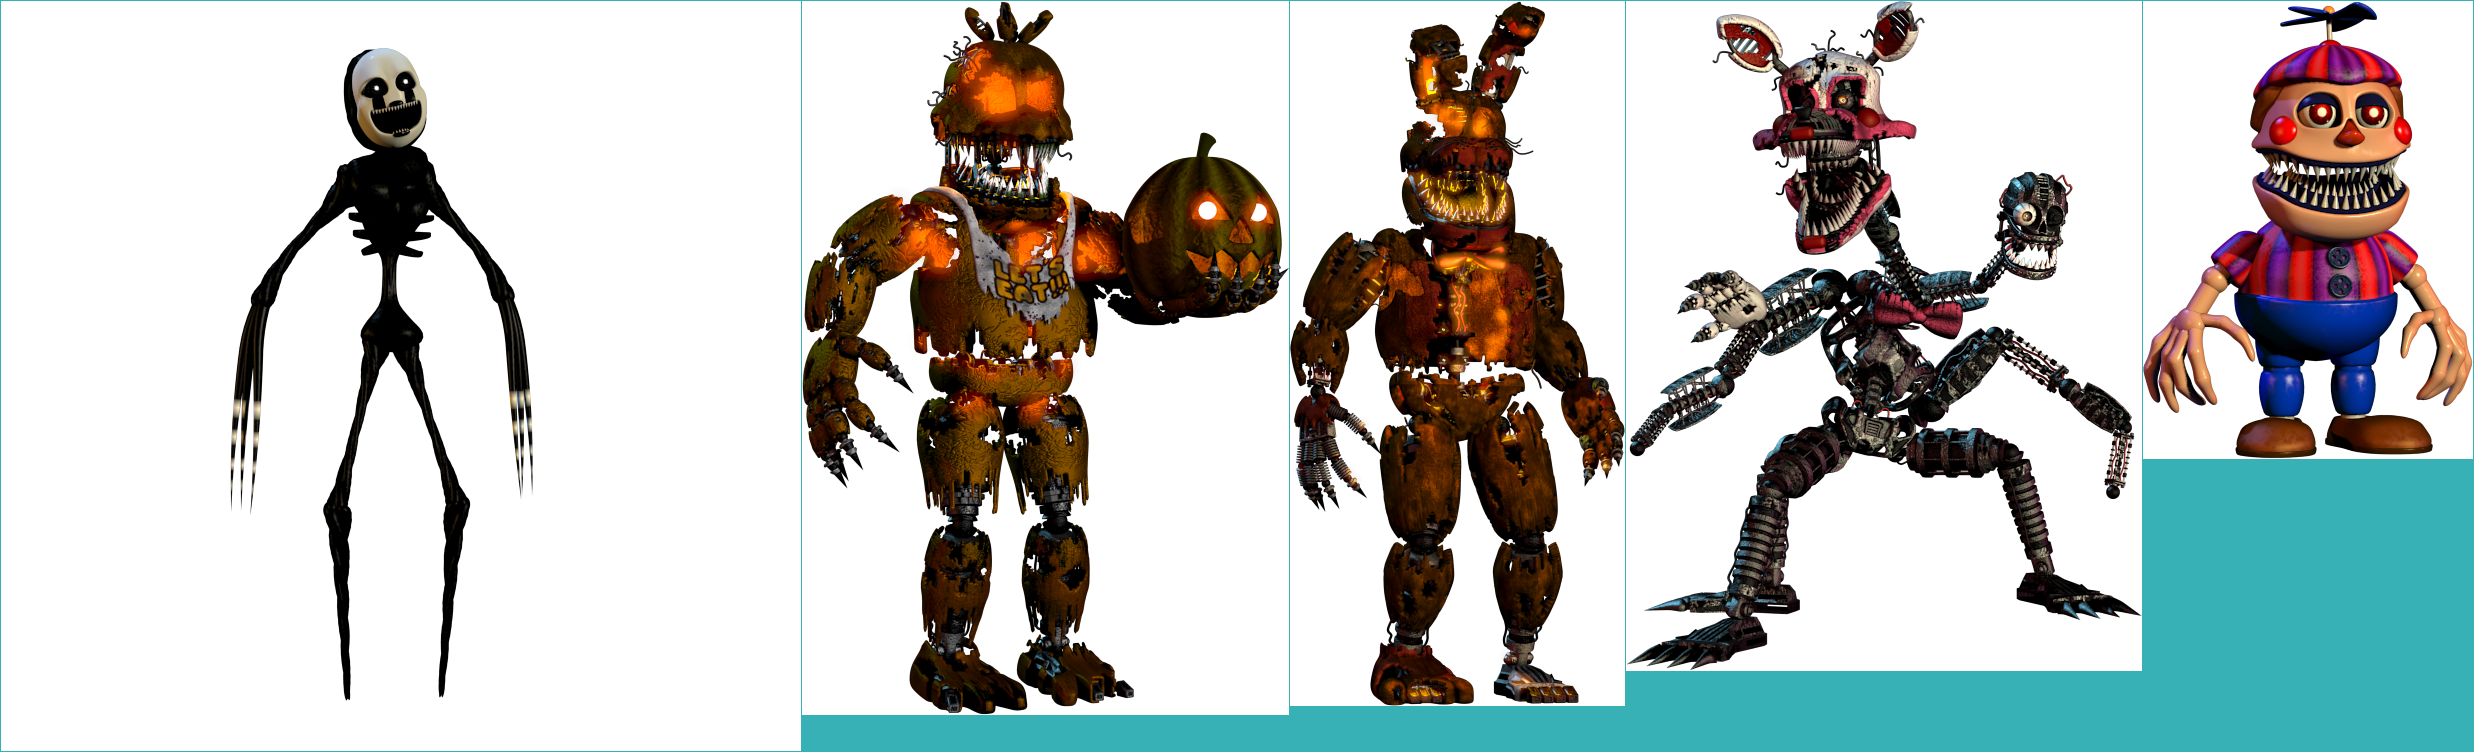 Five Nights at Freddy's 4 - Halloween Extras